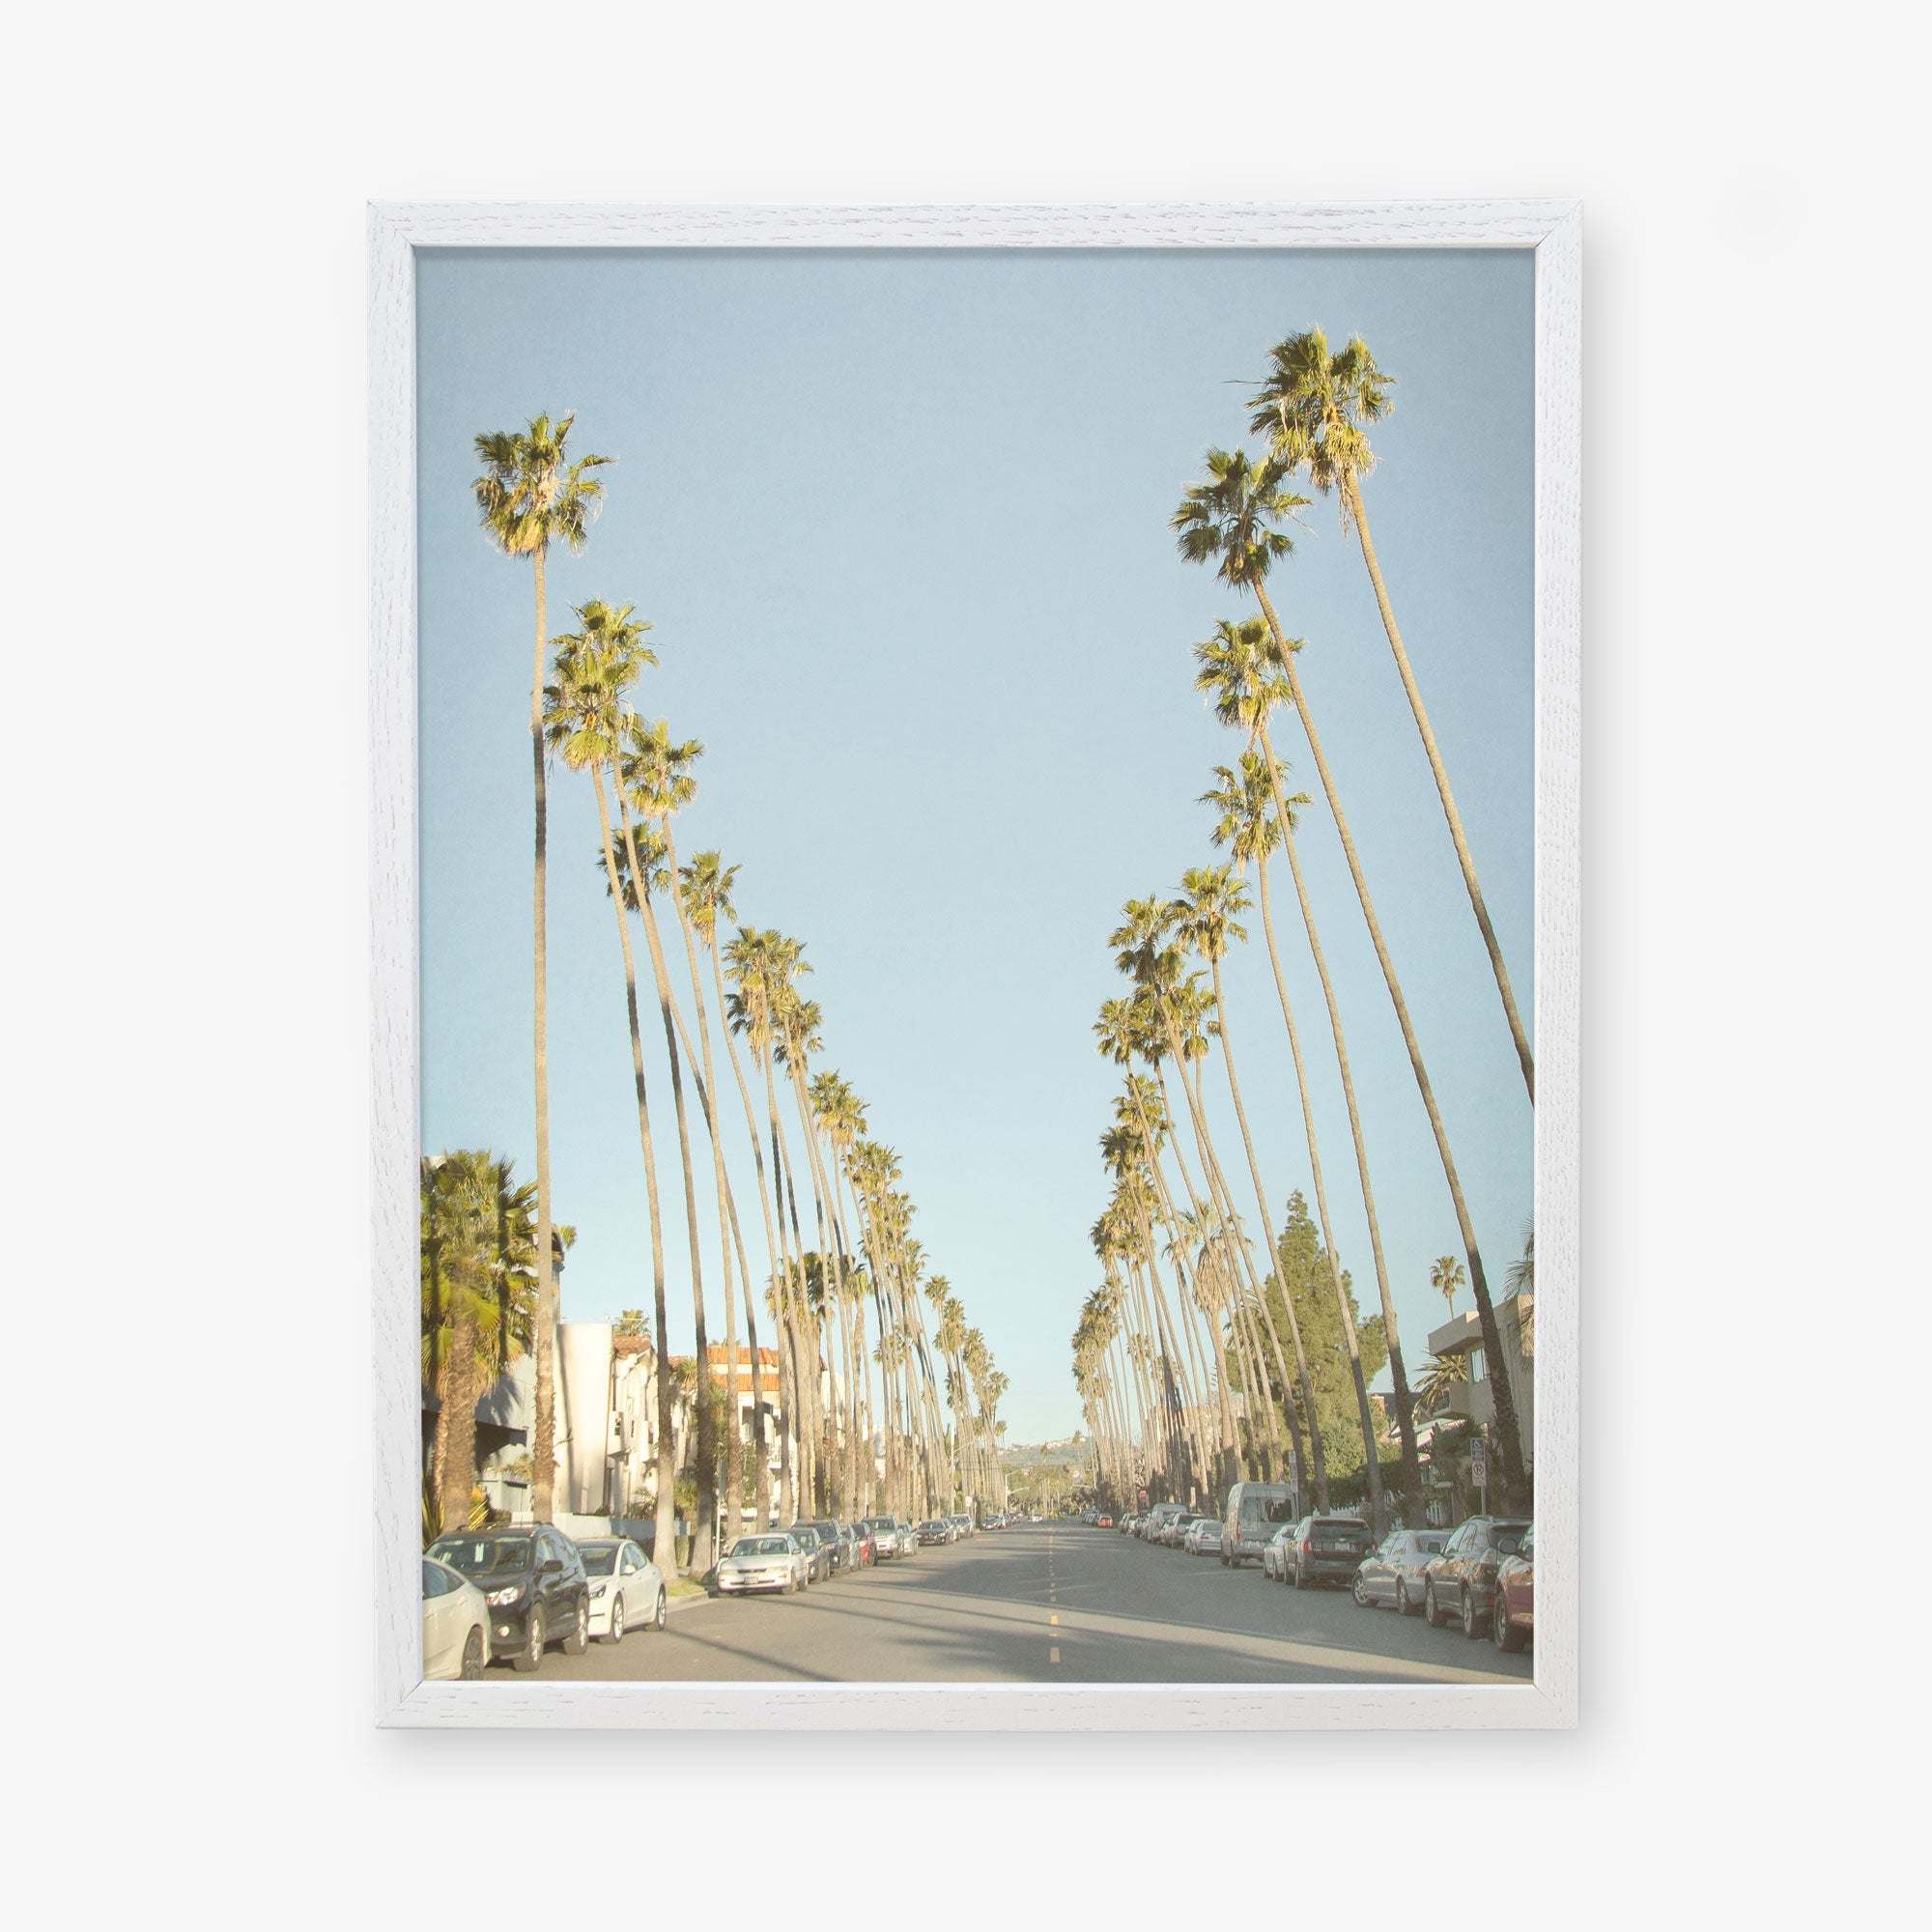 A framed photograph of Los Angeles Palm Tree Lined Street &#39;Sunset Boulevard Dreams&#39; by Offley Green, lined with tall palm trees on both sides, parked cars, and a clear blue sky.